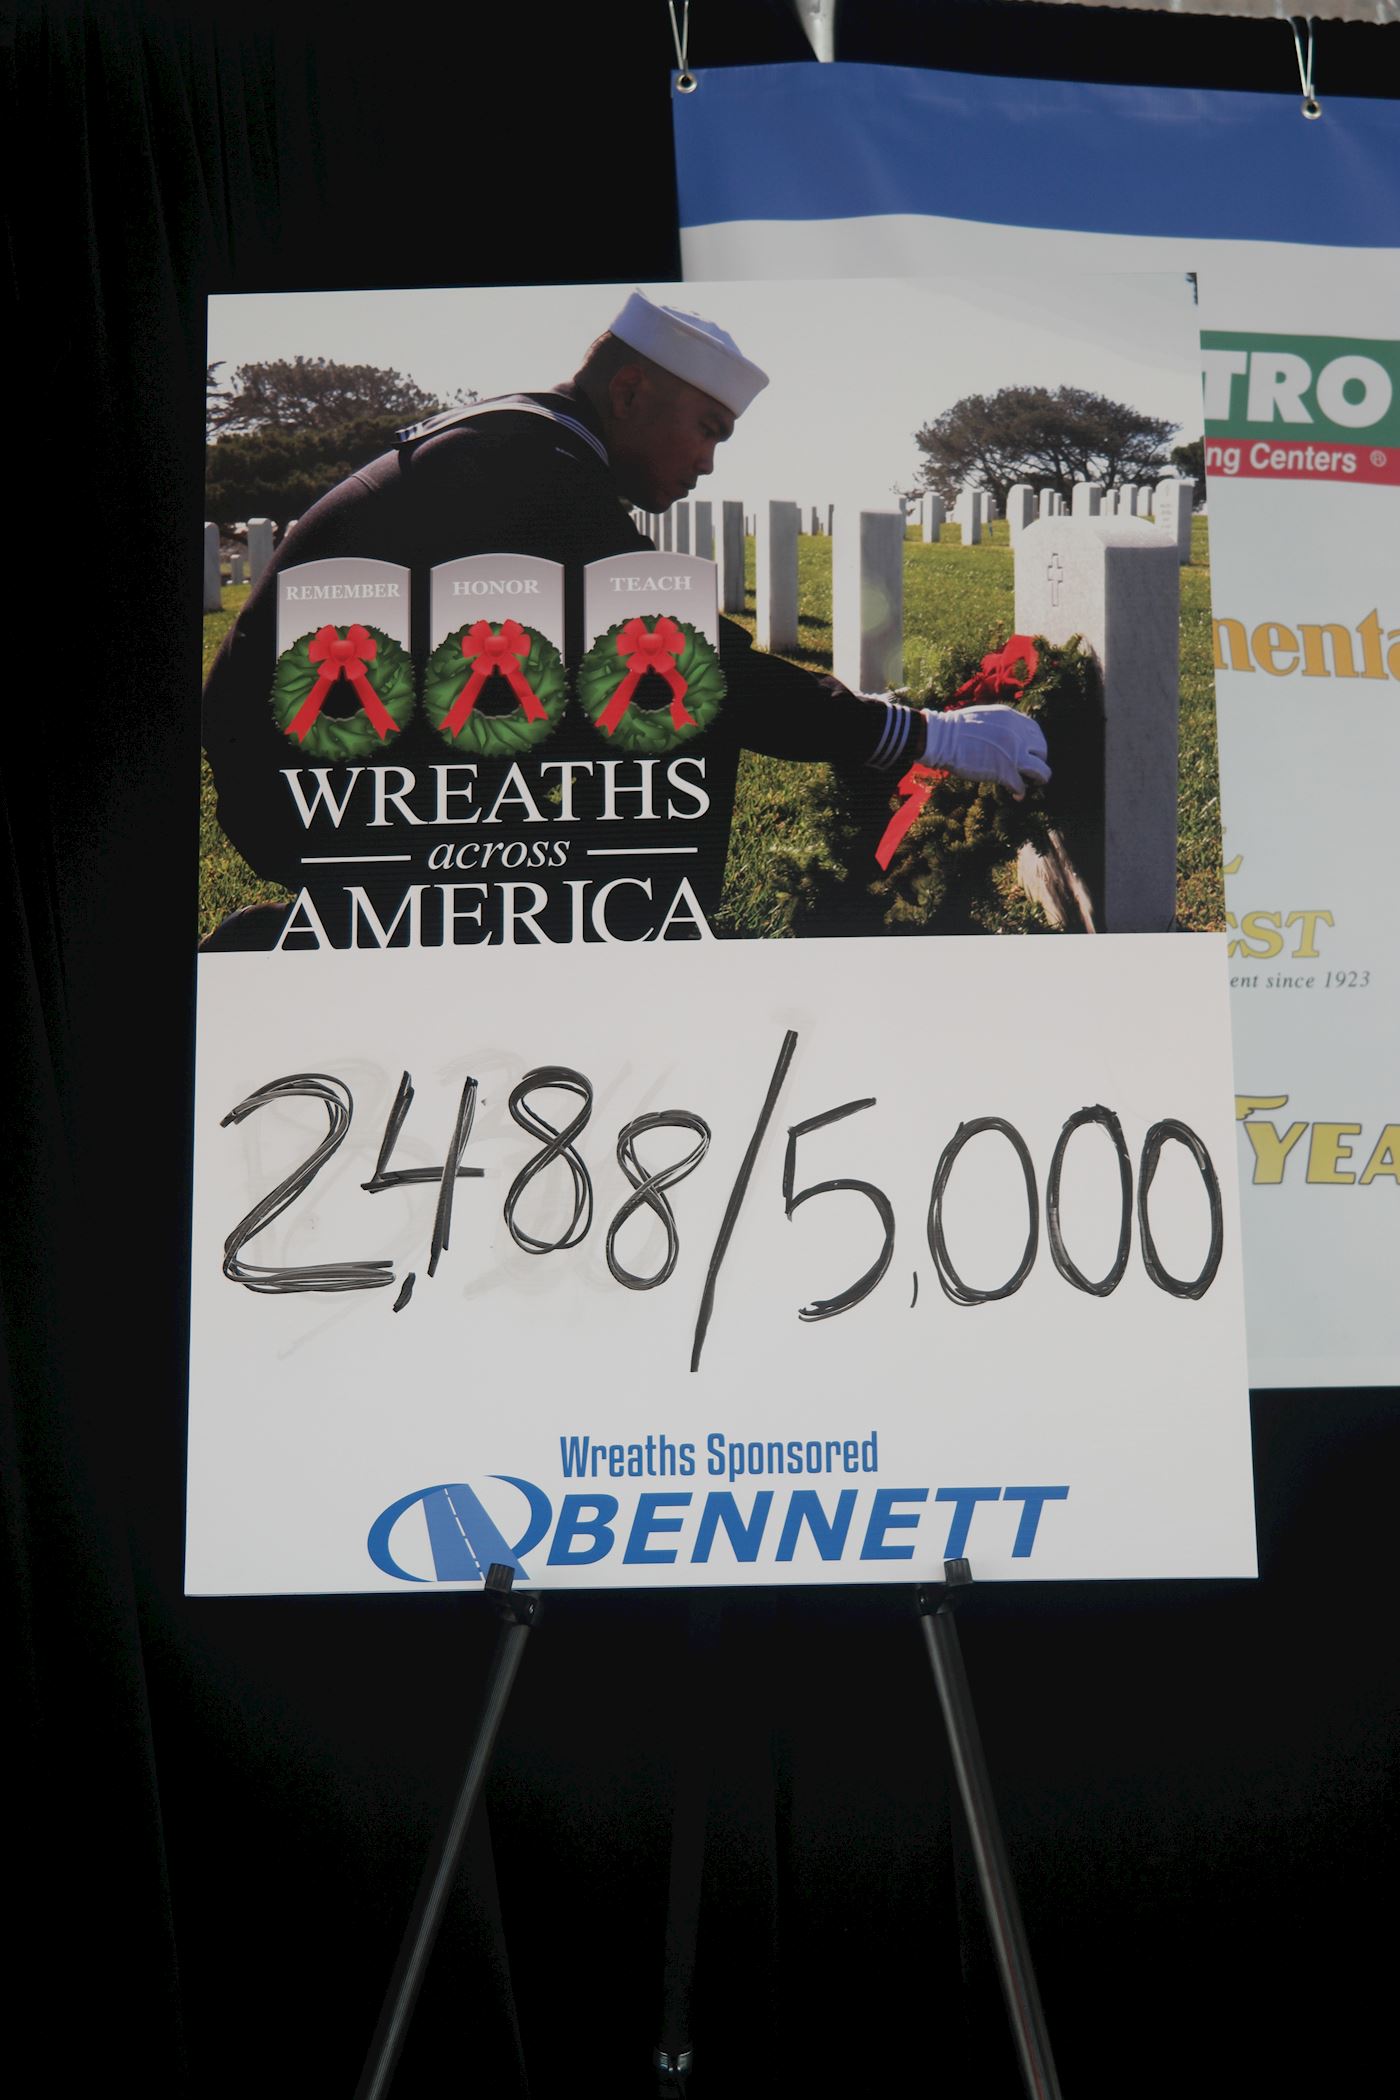 As funds were raised Bennett tracked the number of wreaths purchased which ended up at over 3,000 toward the goal of 5,000.